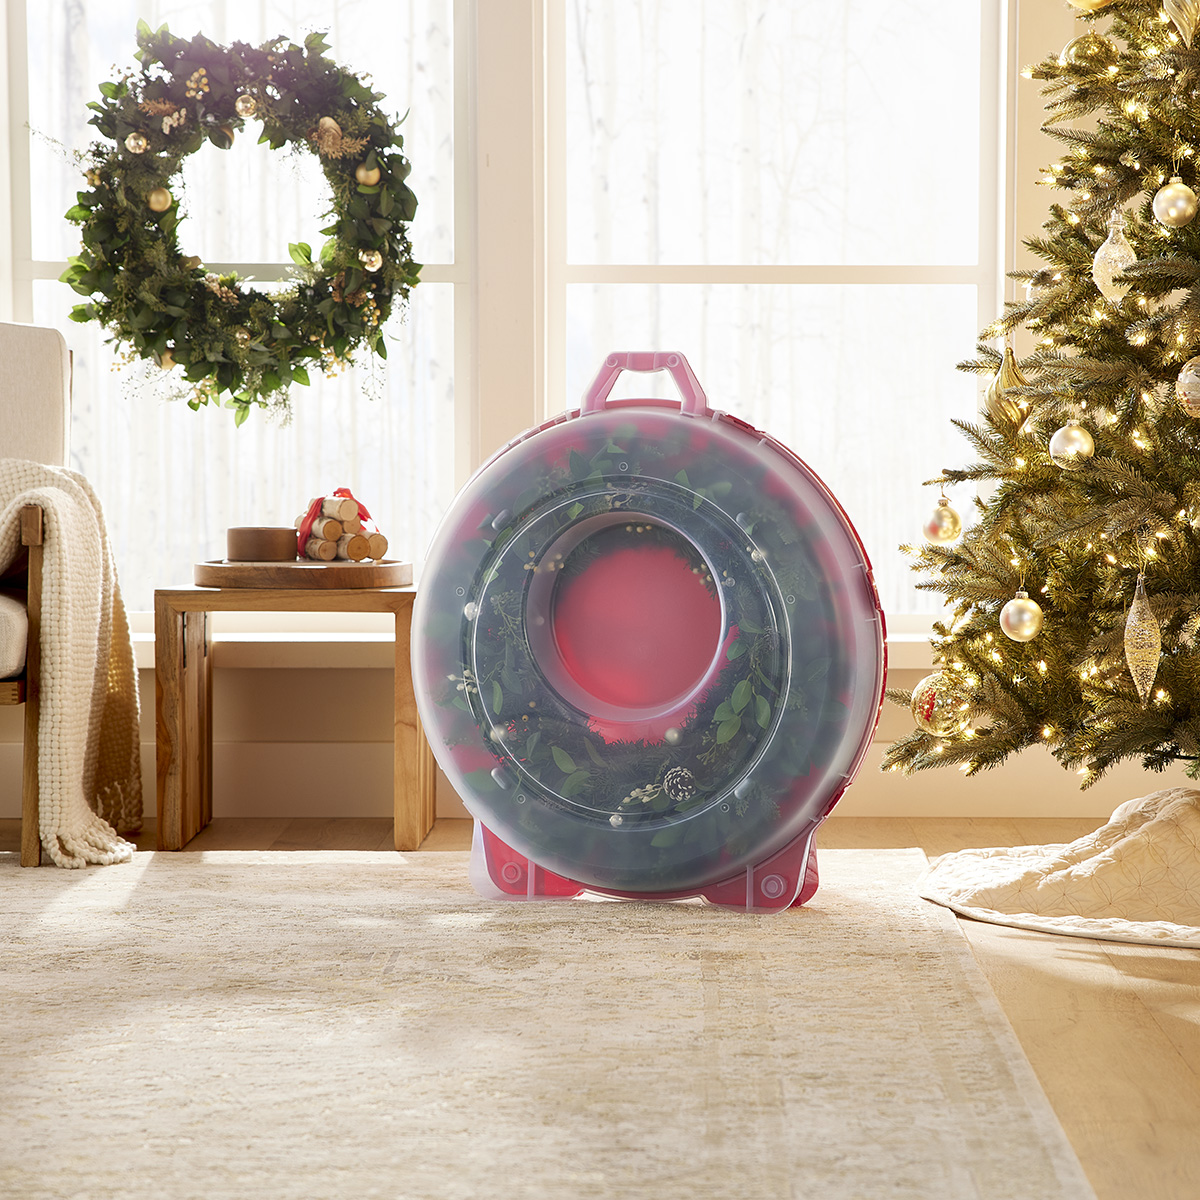 The 6 Best Wreath Storage Containers of 2023